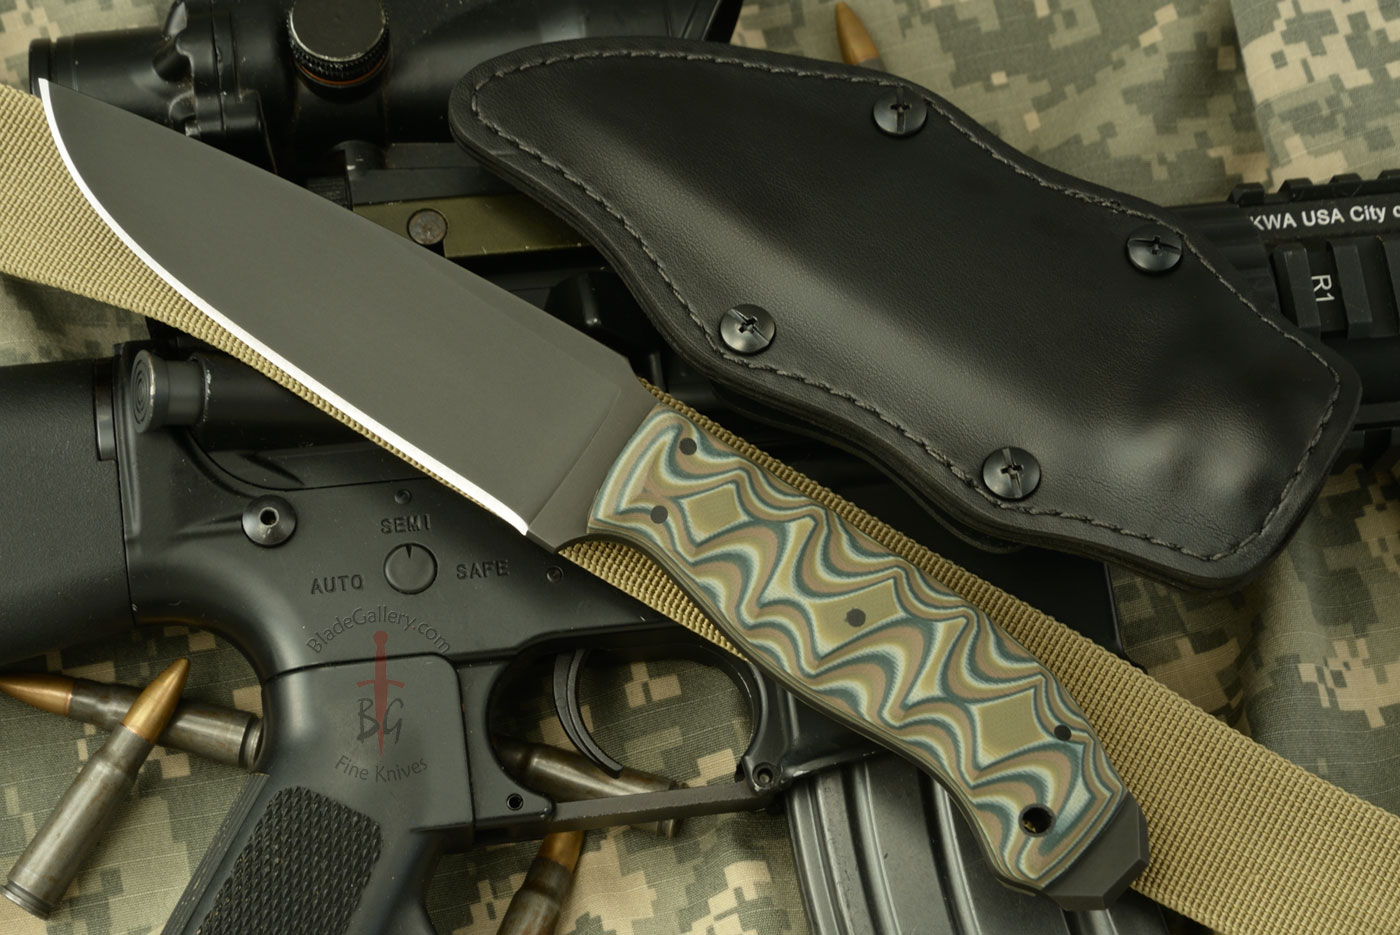 Drop Point Crusher Belt Knife with Sculpted Camo G10